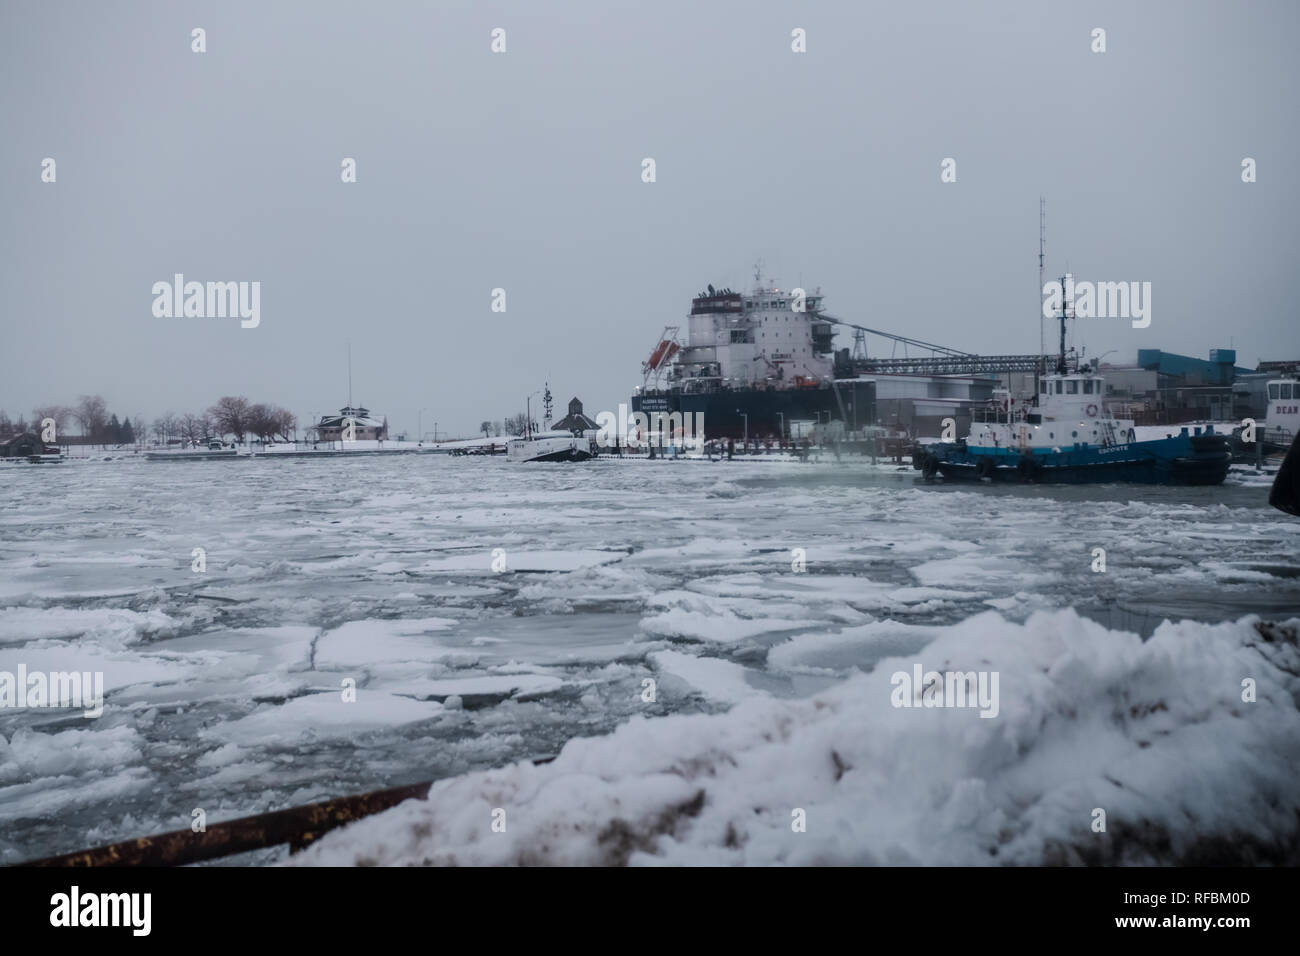 An image of Goderich harbor in winter. Stock Photo